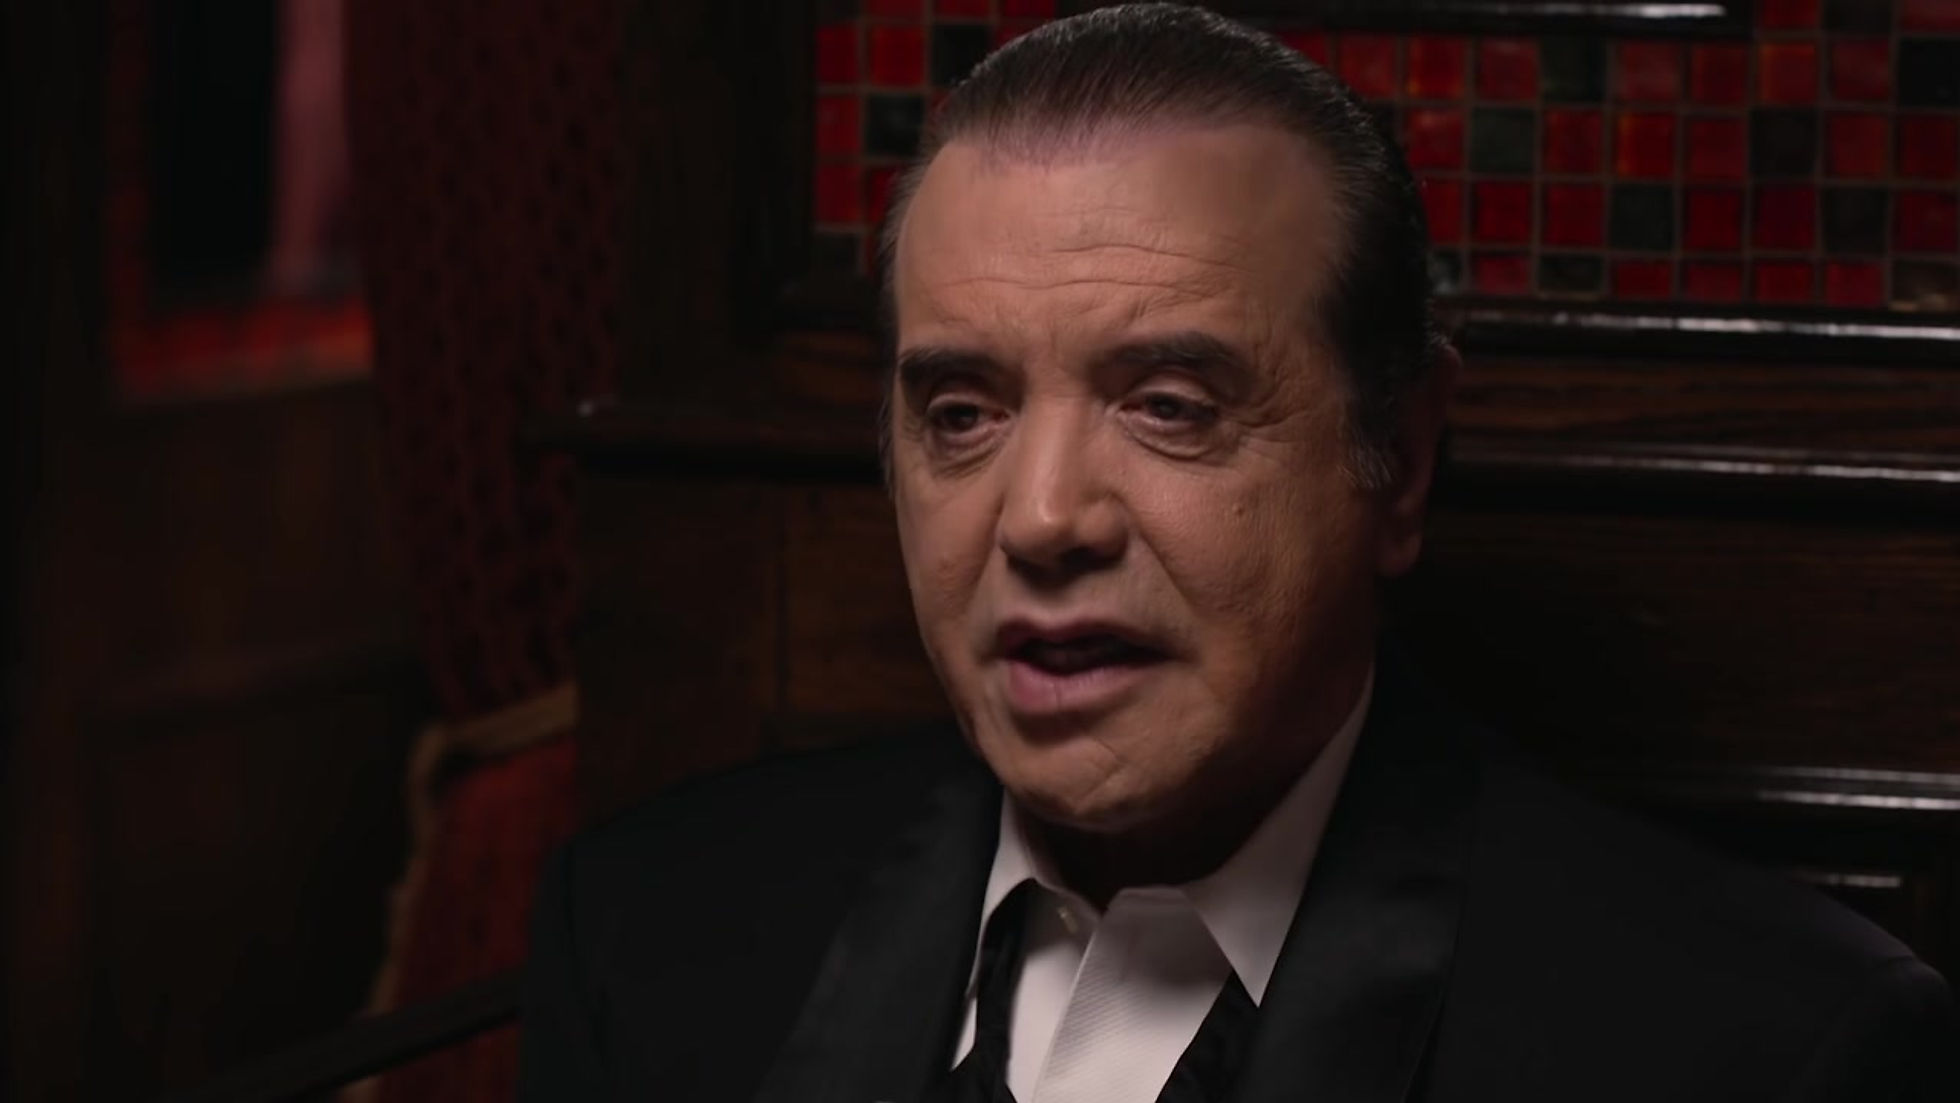 BiVi Moments with Chazz Palminteri - The Understudy